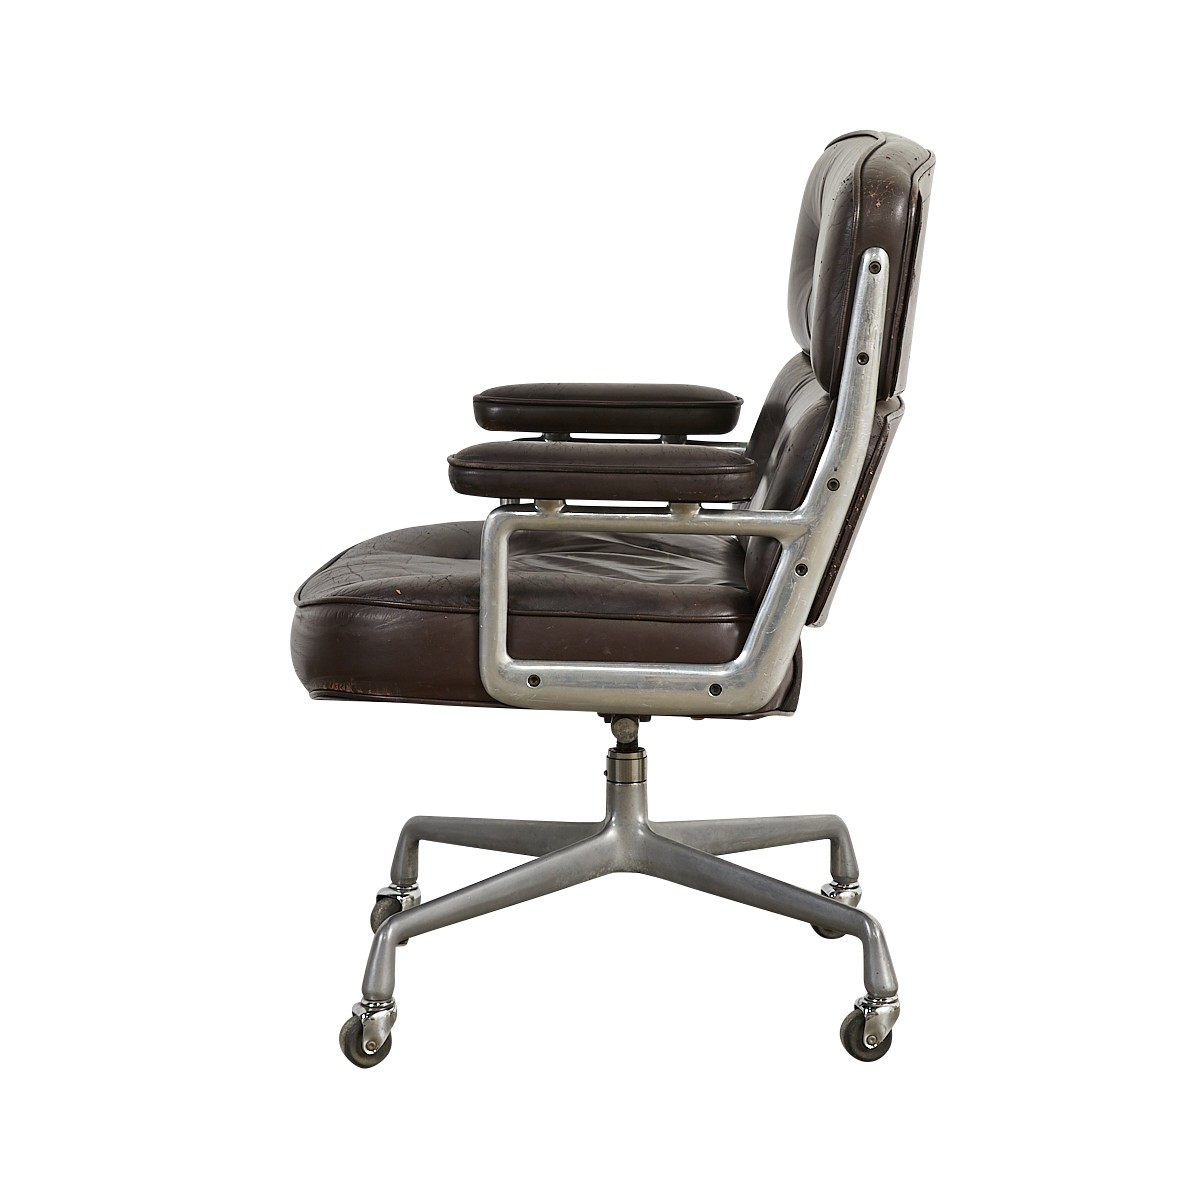 Eames Herman Miller Time Life Chair 1st Gen. - Image 4 of 14